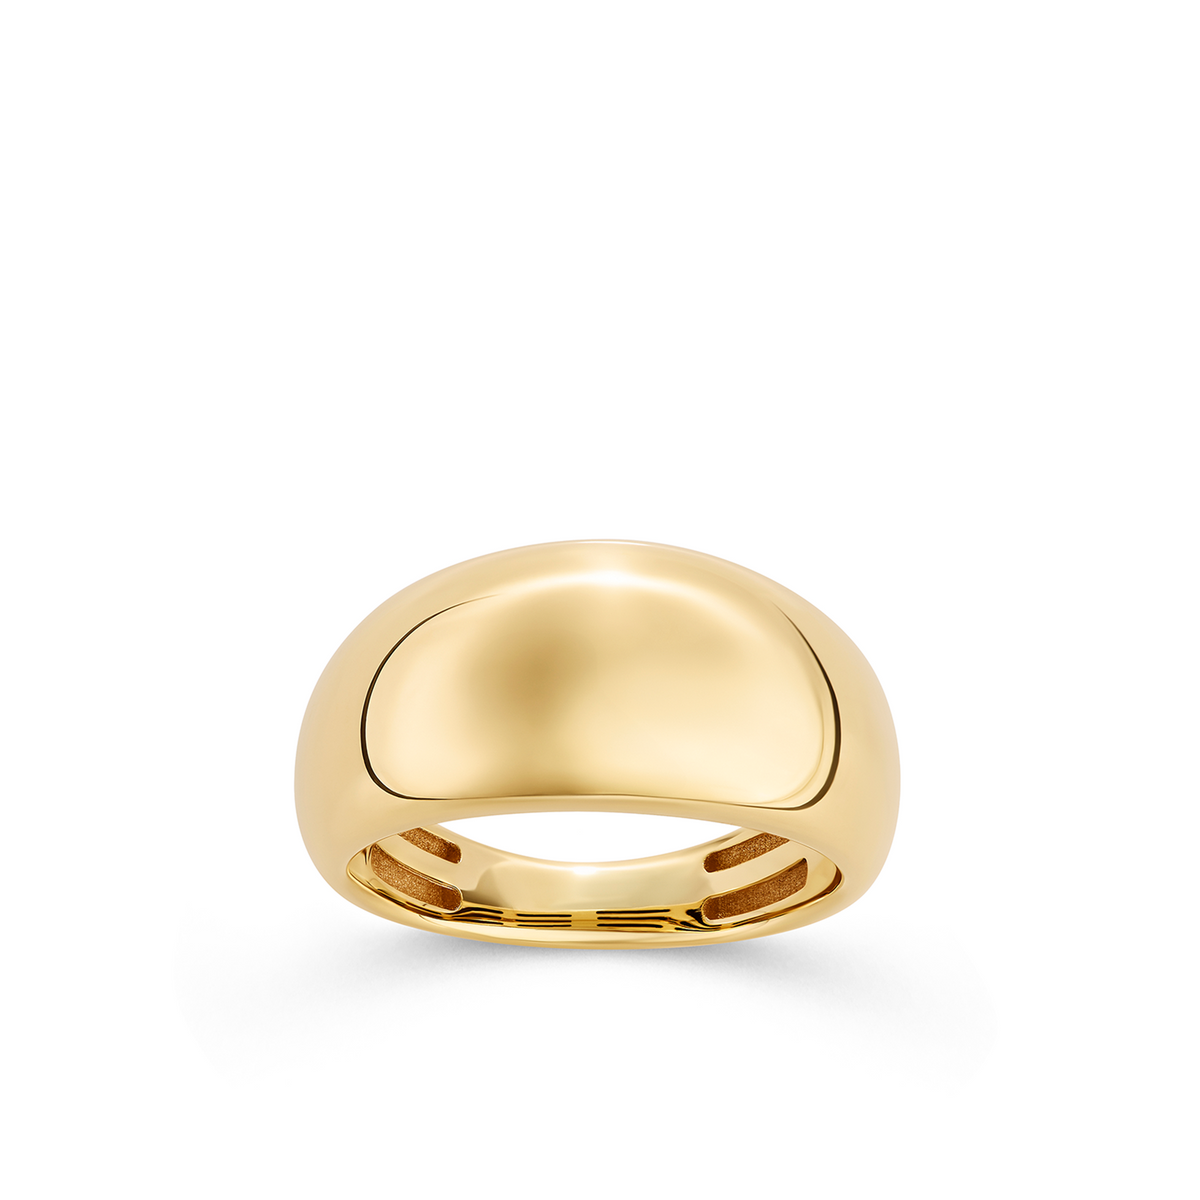 Dome Dress Ring in 9ct Yellow Gold